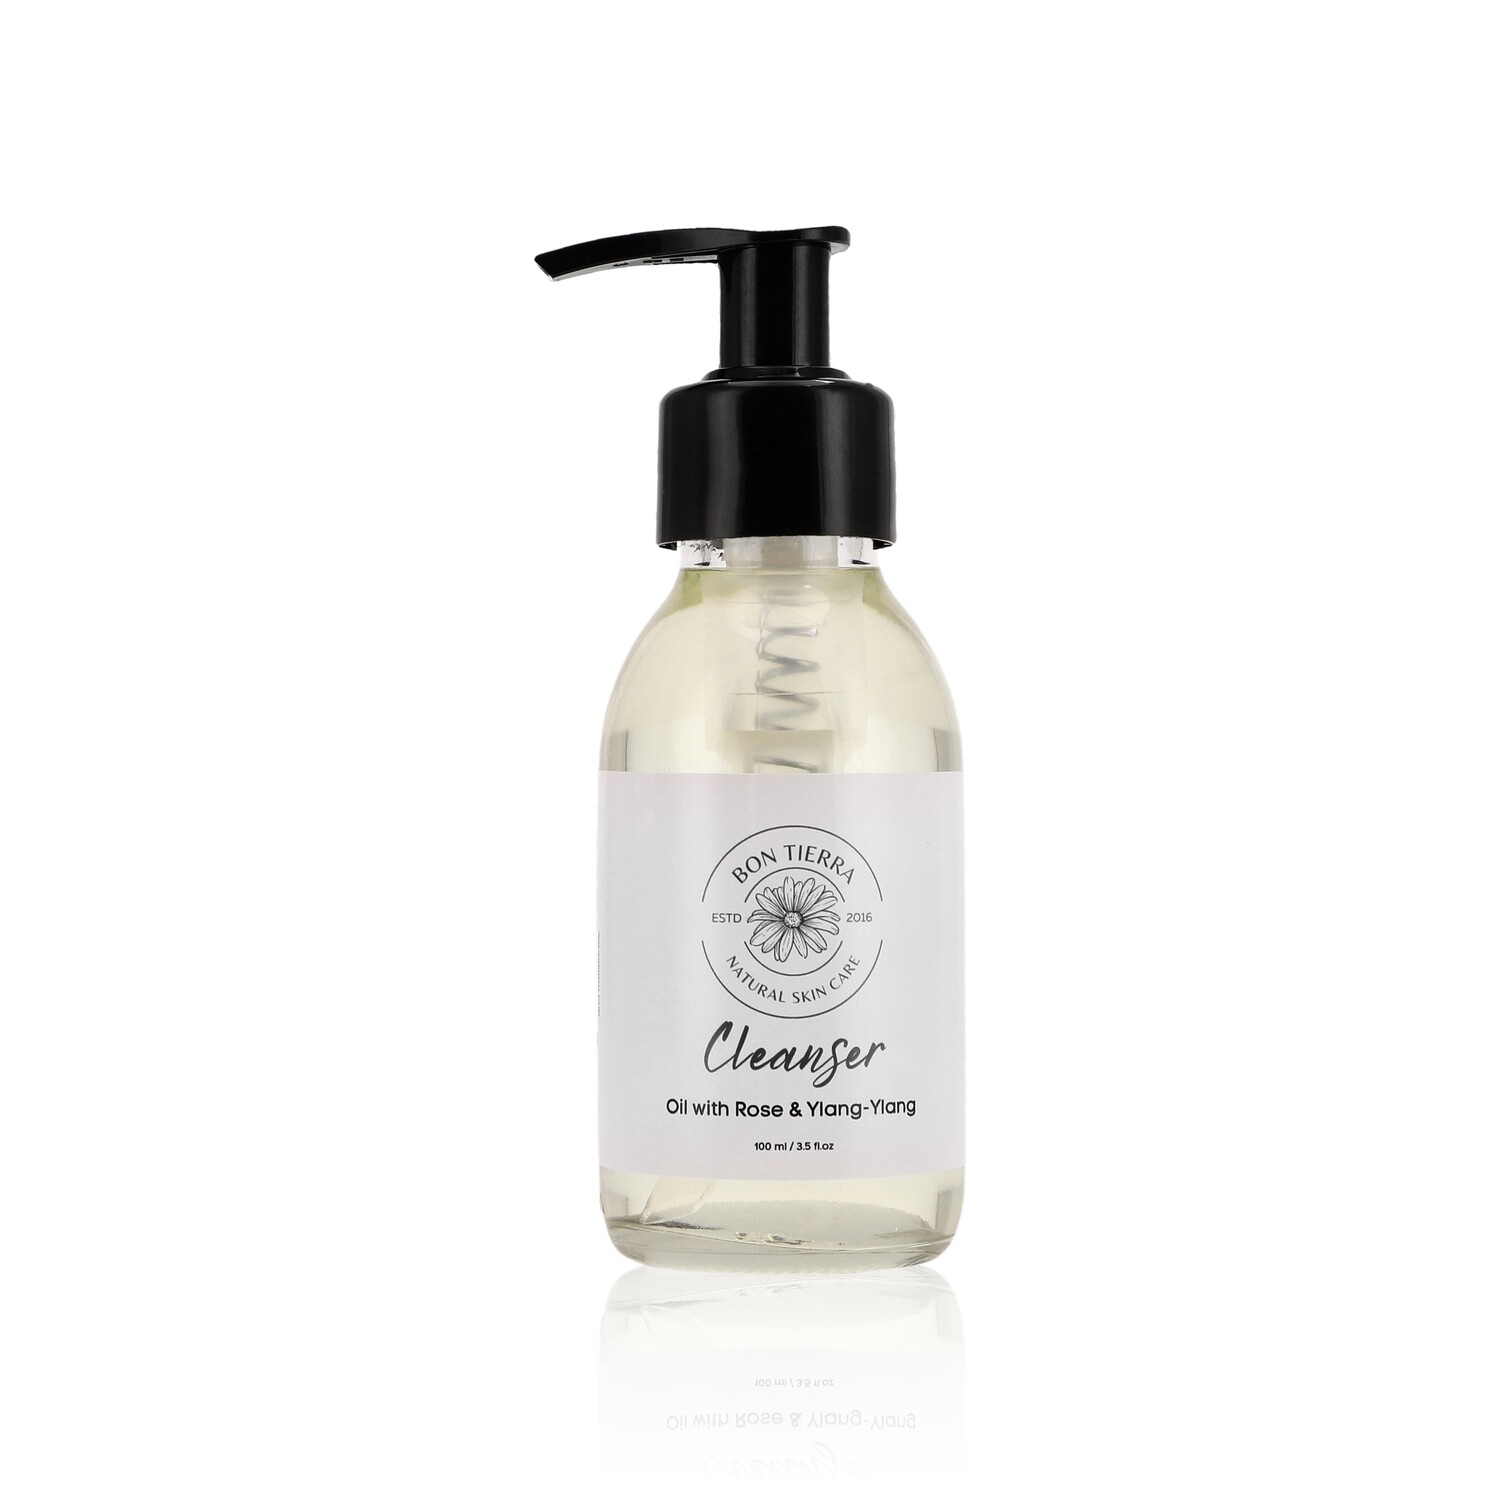 CLEANSER OIL WITH ROSE & YLANG-YLANG 100ML